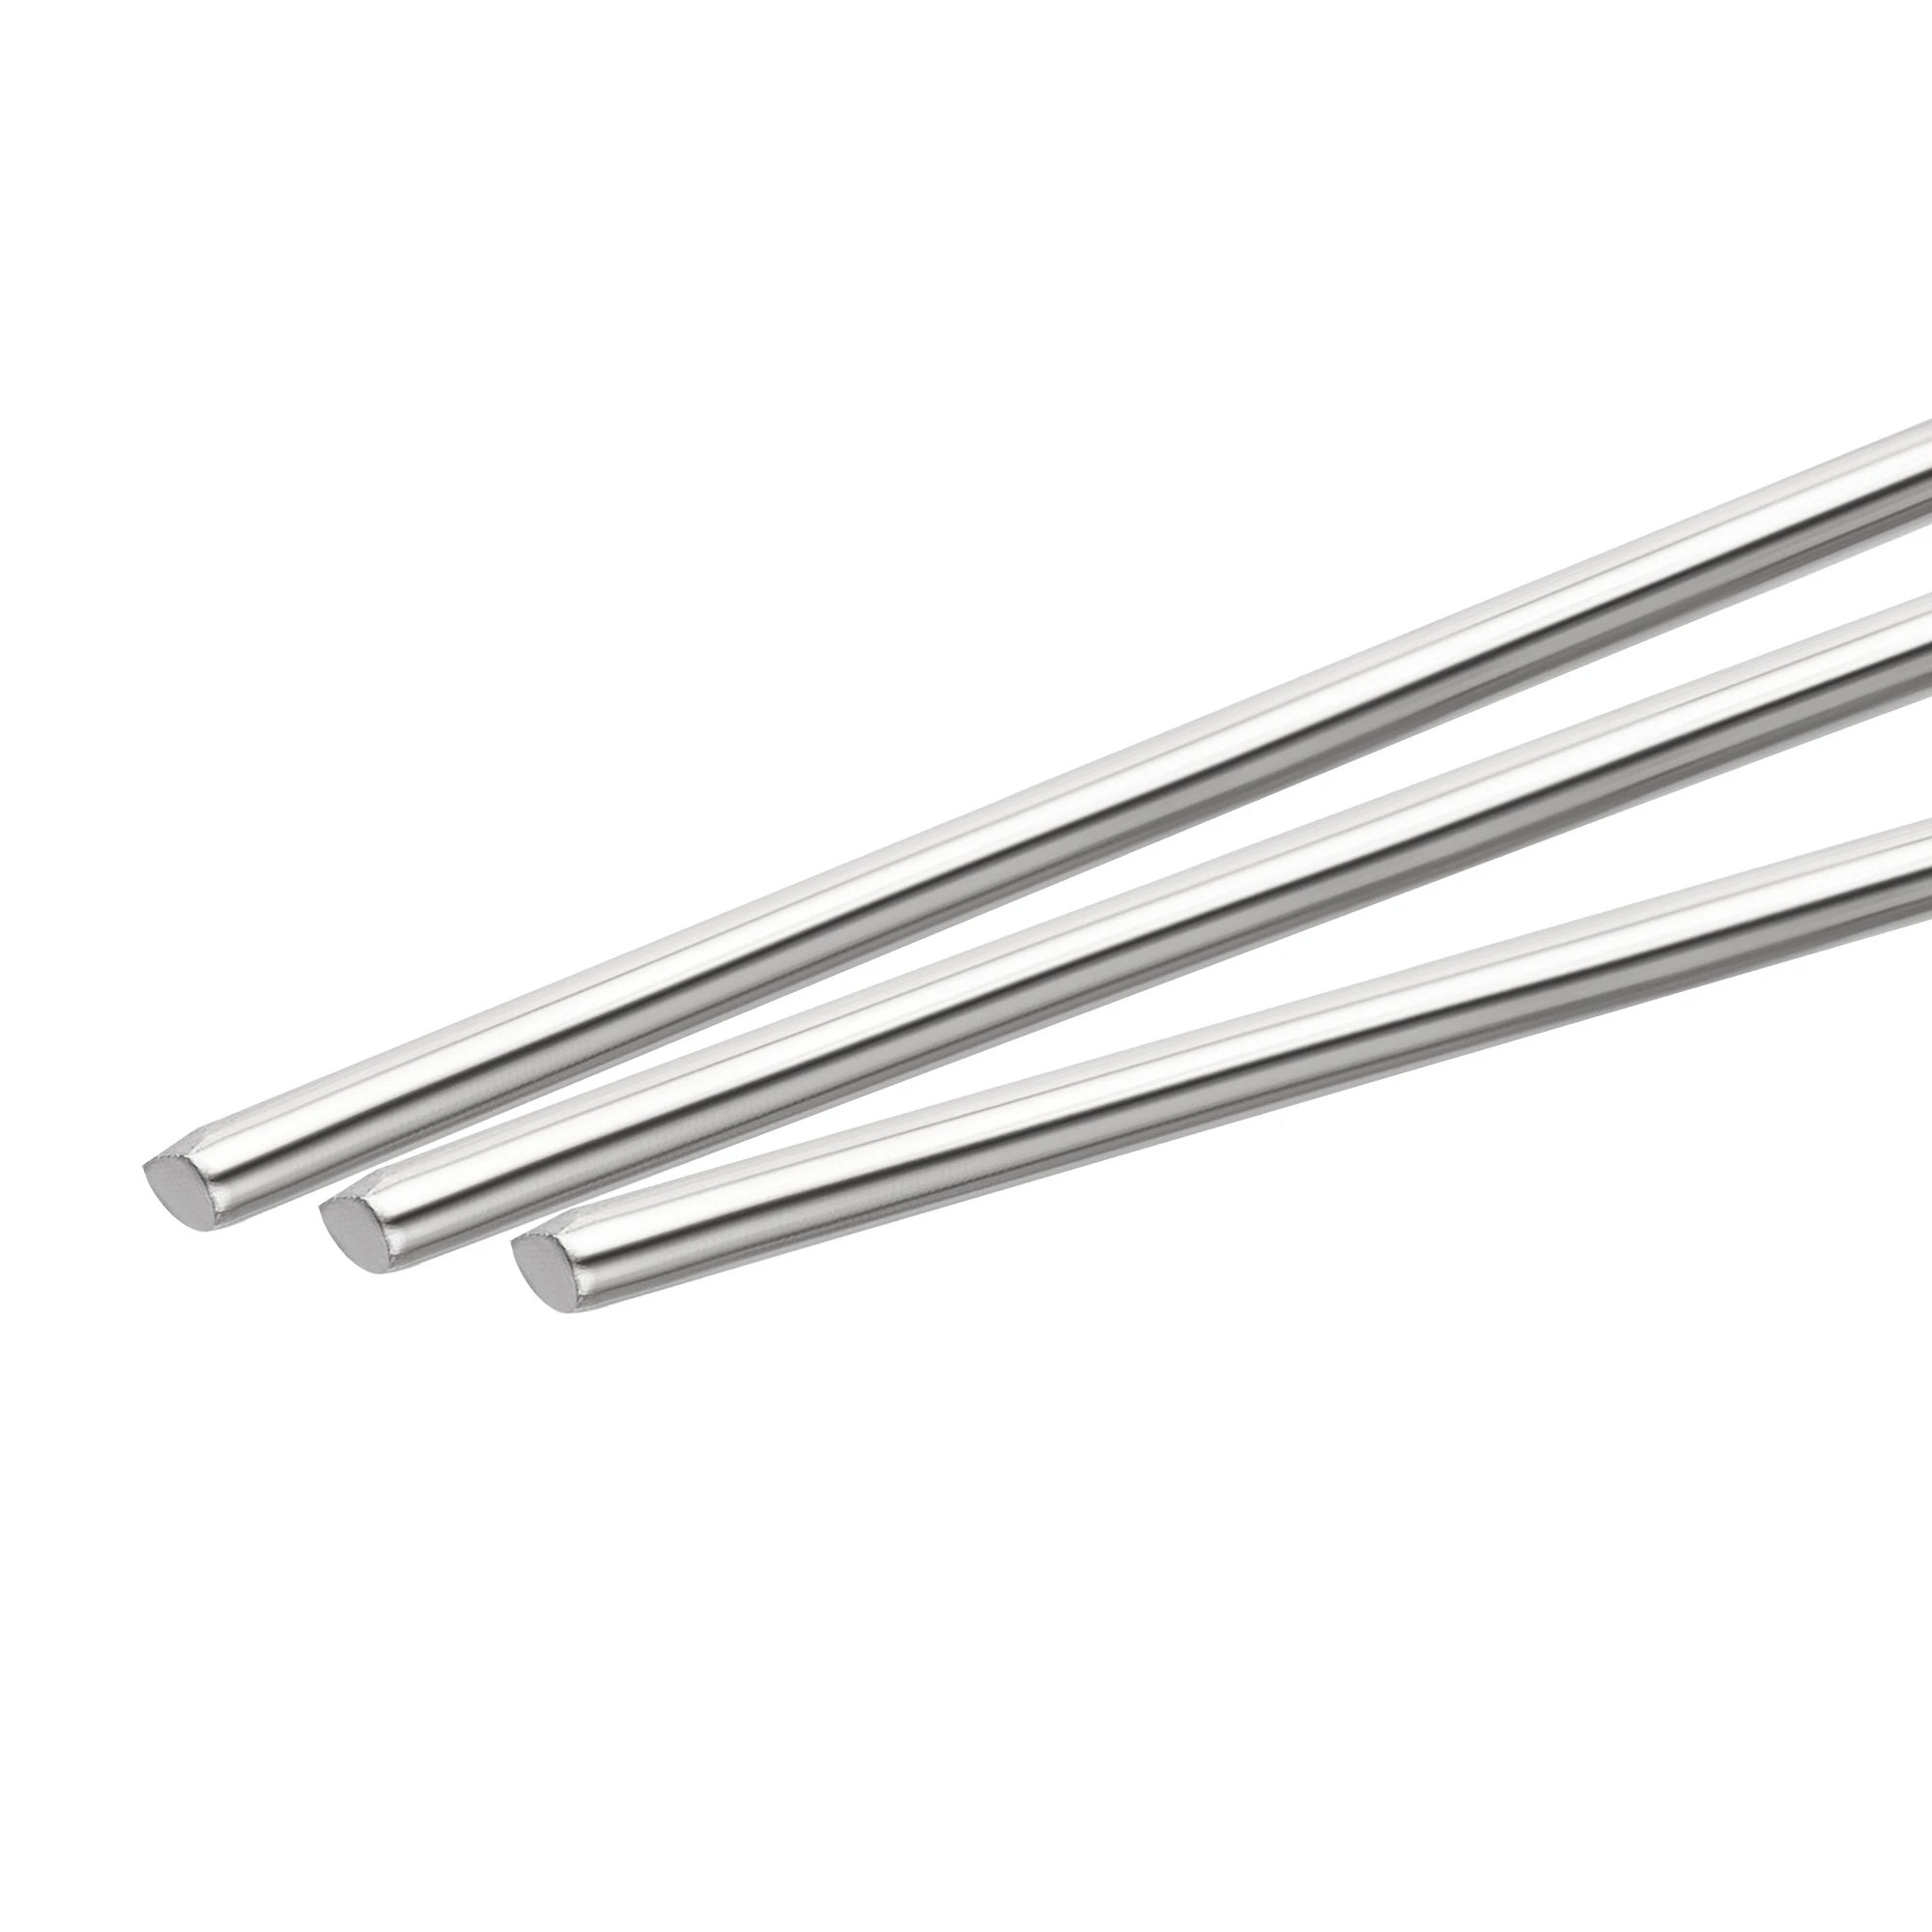 

Uxcell 304 Stainless Steel Round Rods Bar,2.5mm Diameter 250mm Length for Various Shaft DIY Craft Model Car Plane Ship 20pcs